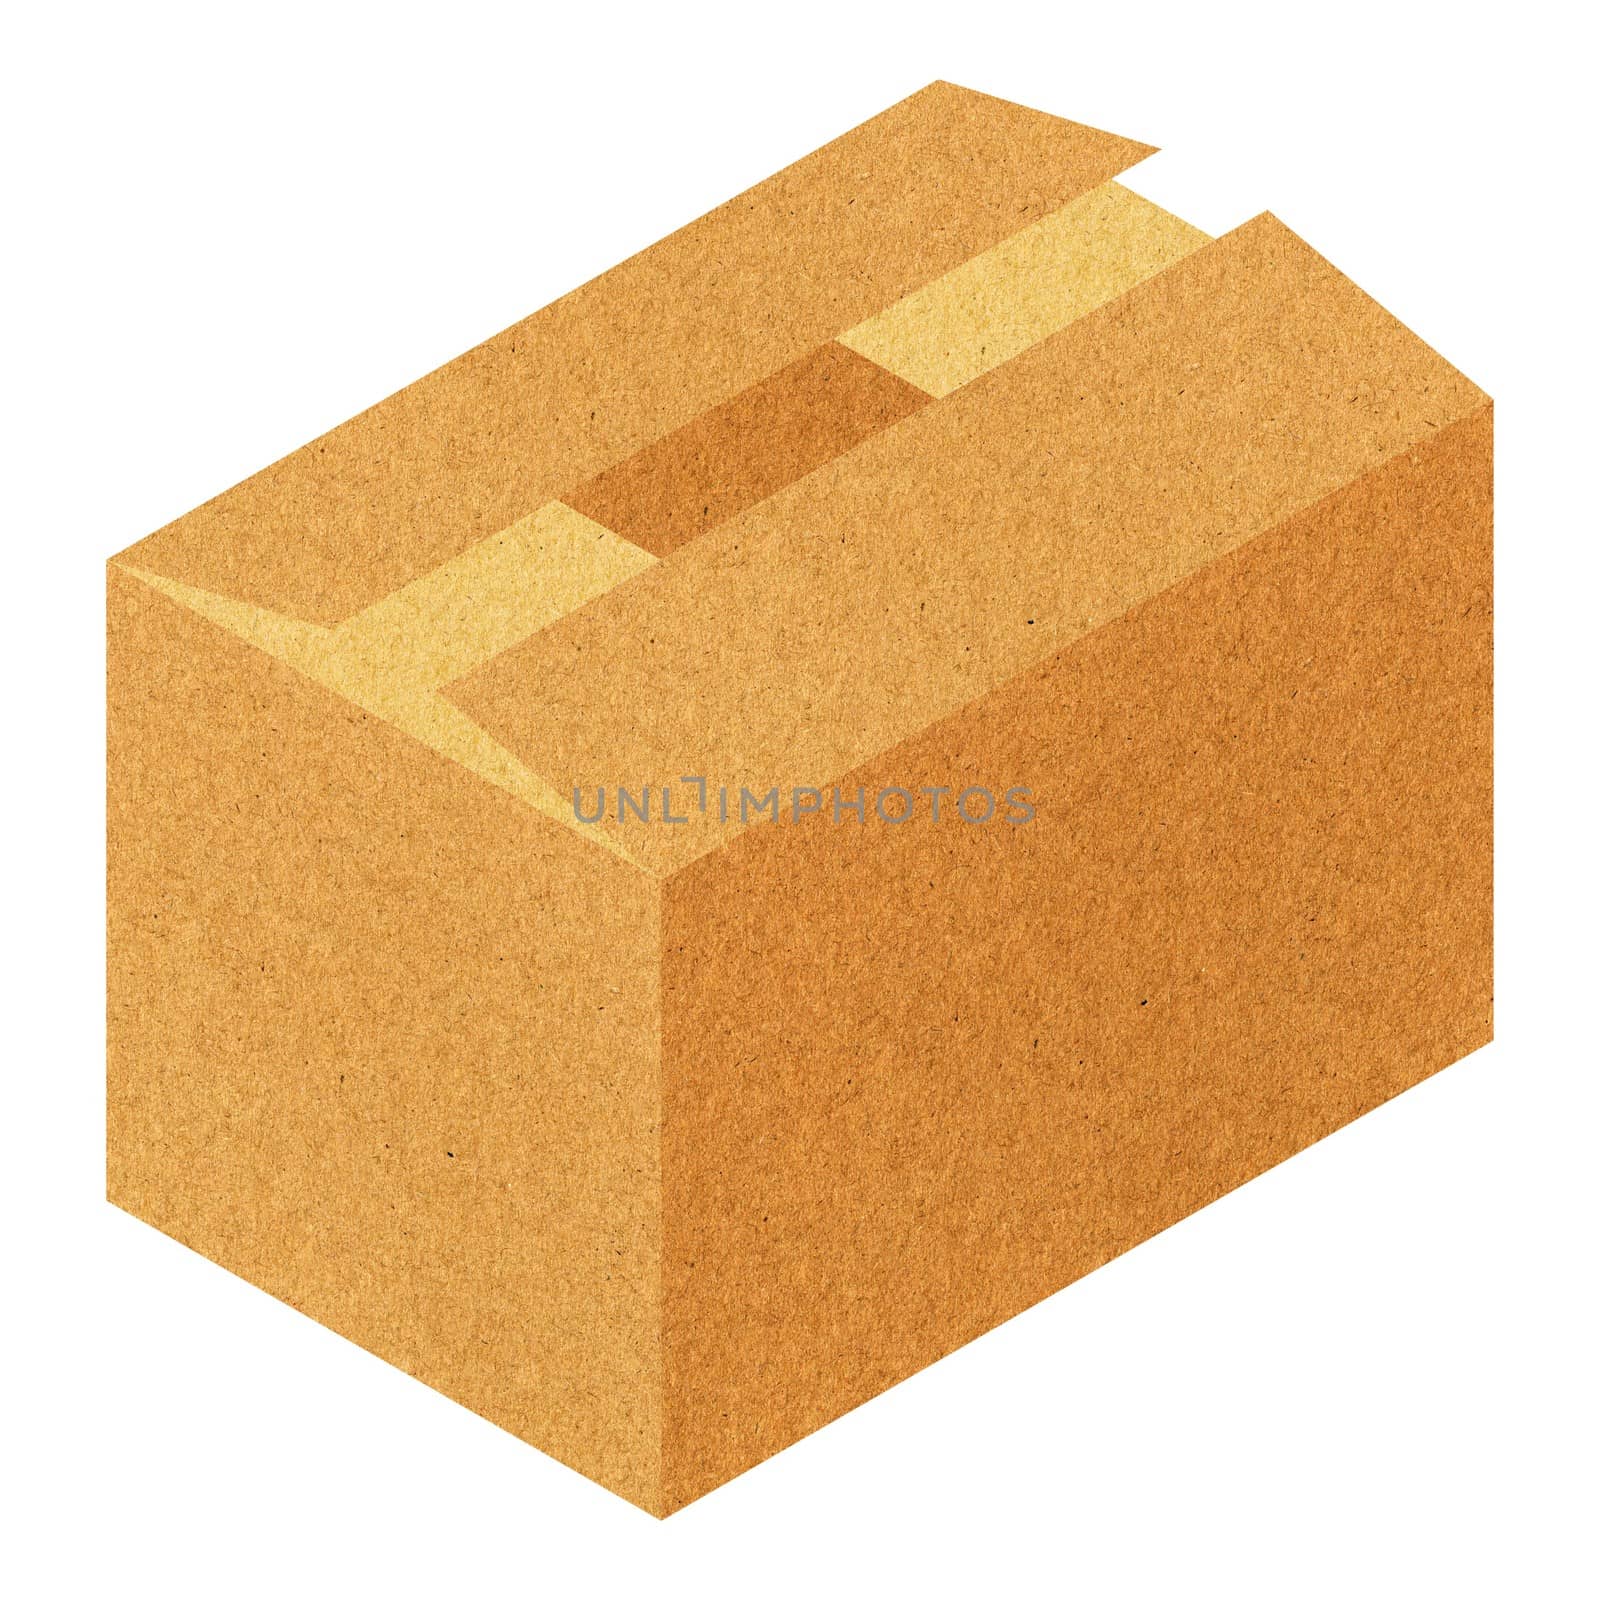 brown corrugated cardboard packet isolated over white background